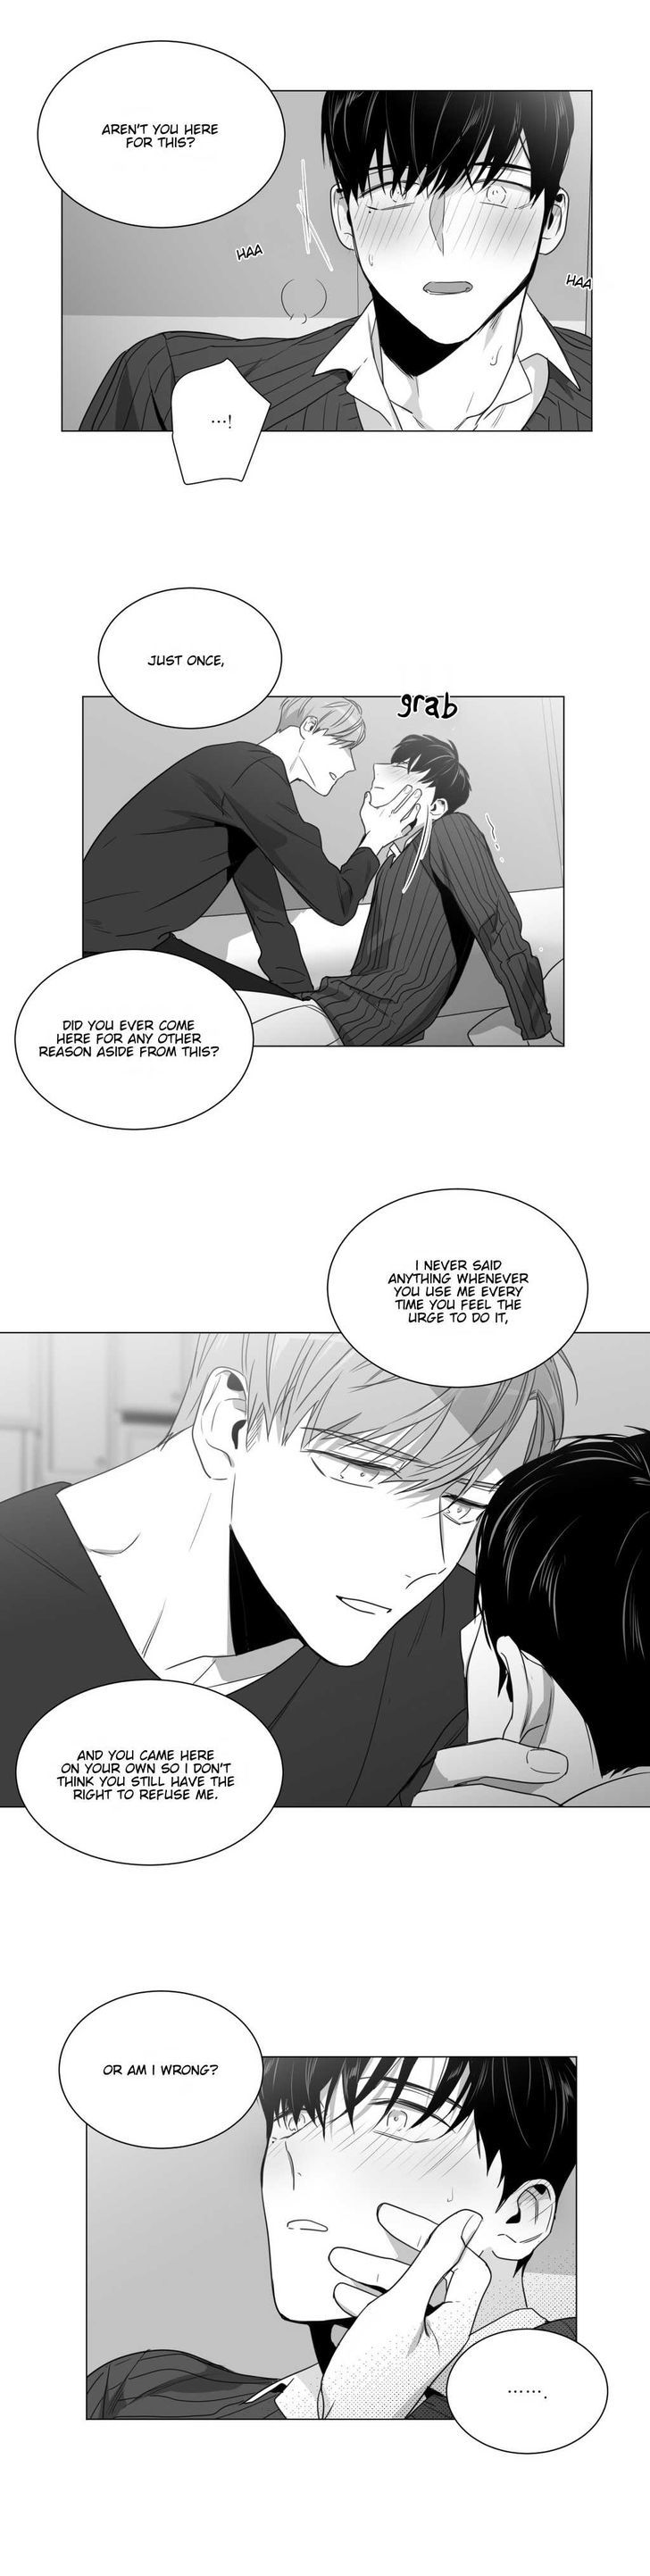 Lover Boy (Lezhin) Chapter 028 page 5